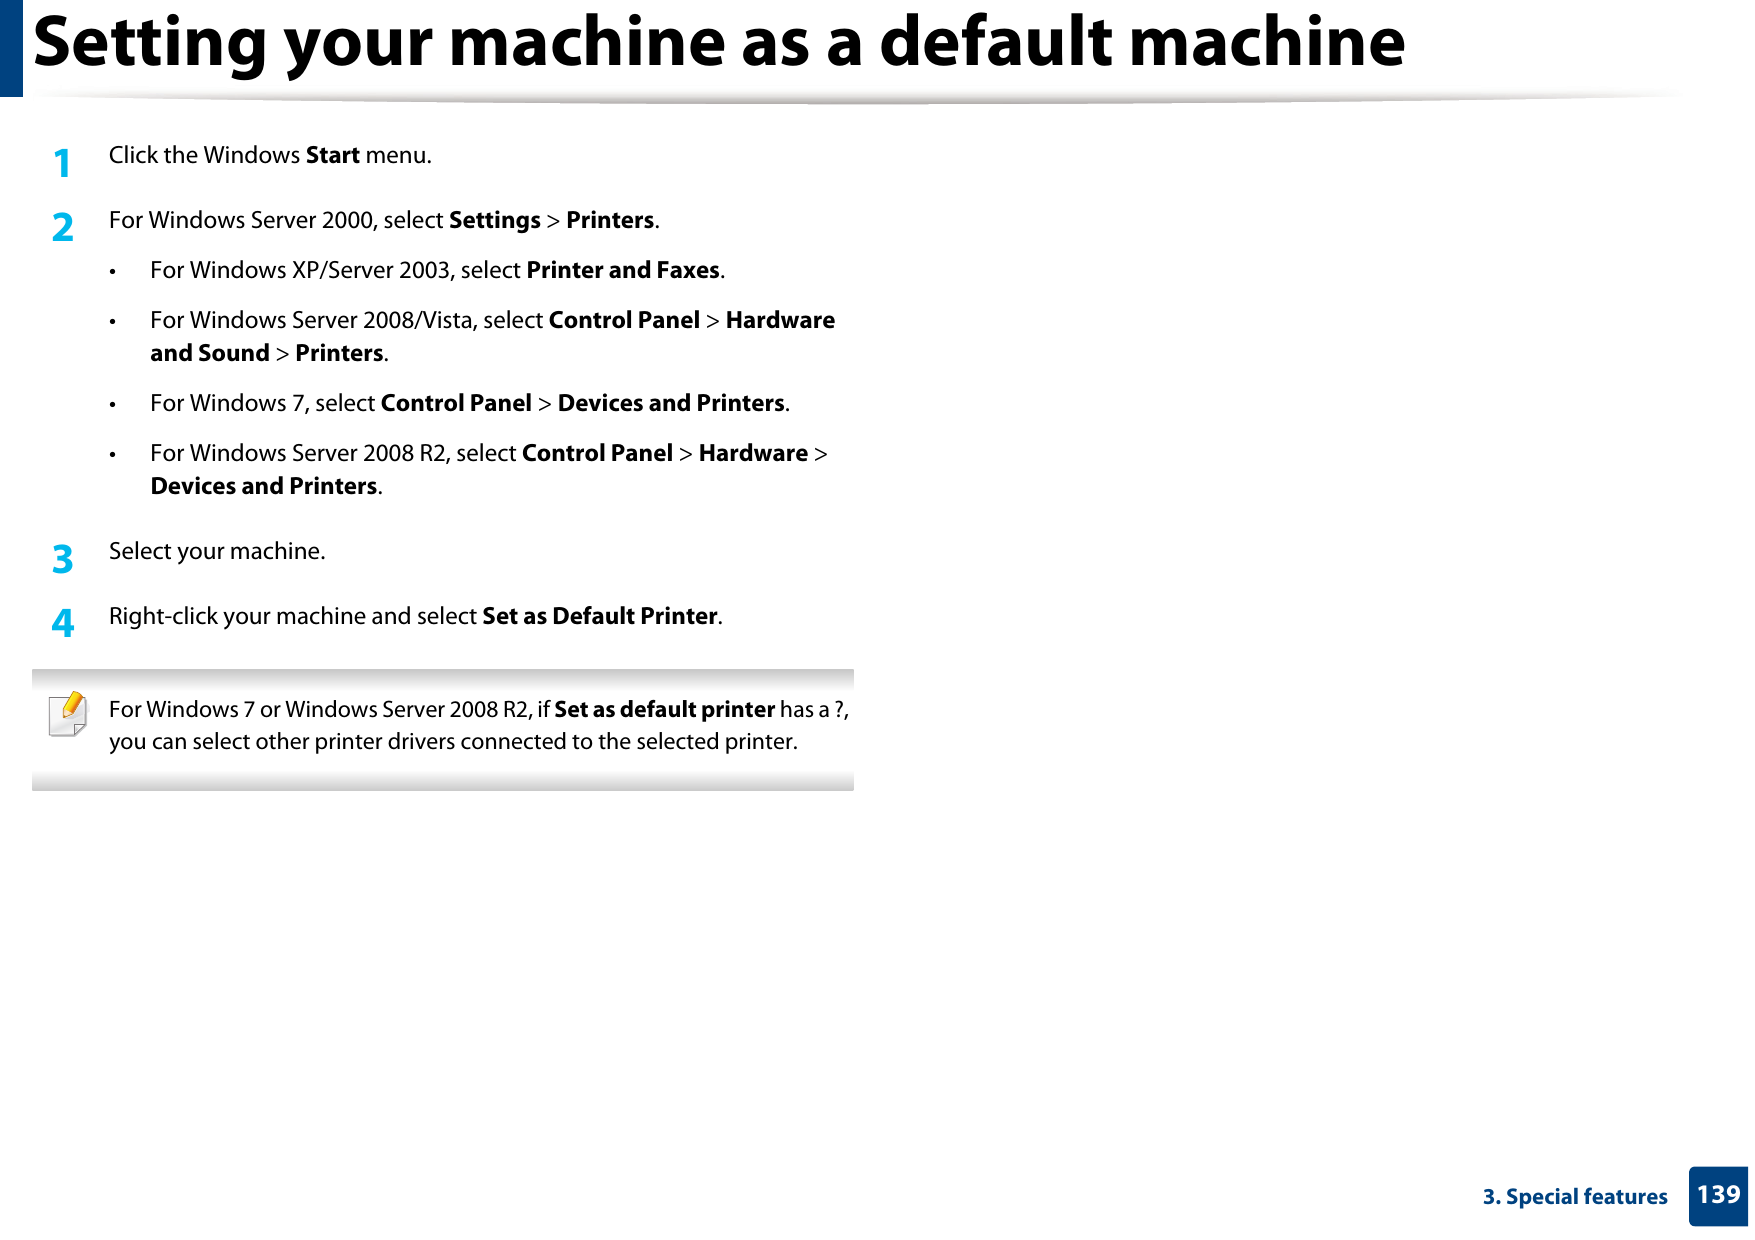 1393. Special featuresSetting your machine as a default machine1Click the Windows Start menu.2  For Windows Server 2000, select Settings &gt; Printers.• For Windows XP/Server 2003, select Printer and Faxes. • For Windows Server 2008/Vista, select Control Panel &gt; Hardware and Sound &gt; Printers. • For Windows 7, select Control Panel &gt; Devices and Printers. • For Windows Server 2008 R2, select Control Panel &gt; Hardware &gt; Devices and Printers. 3  Select your machine.4  Right-click your machine and select Set as Default Printer. For Windows 7 or Windows Server 2008 R2, if Set as default printer has a ?, you can select other printer drivers connected to the selected printer. 